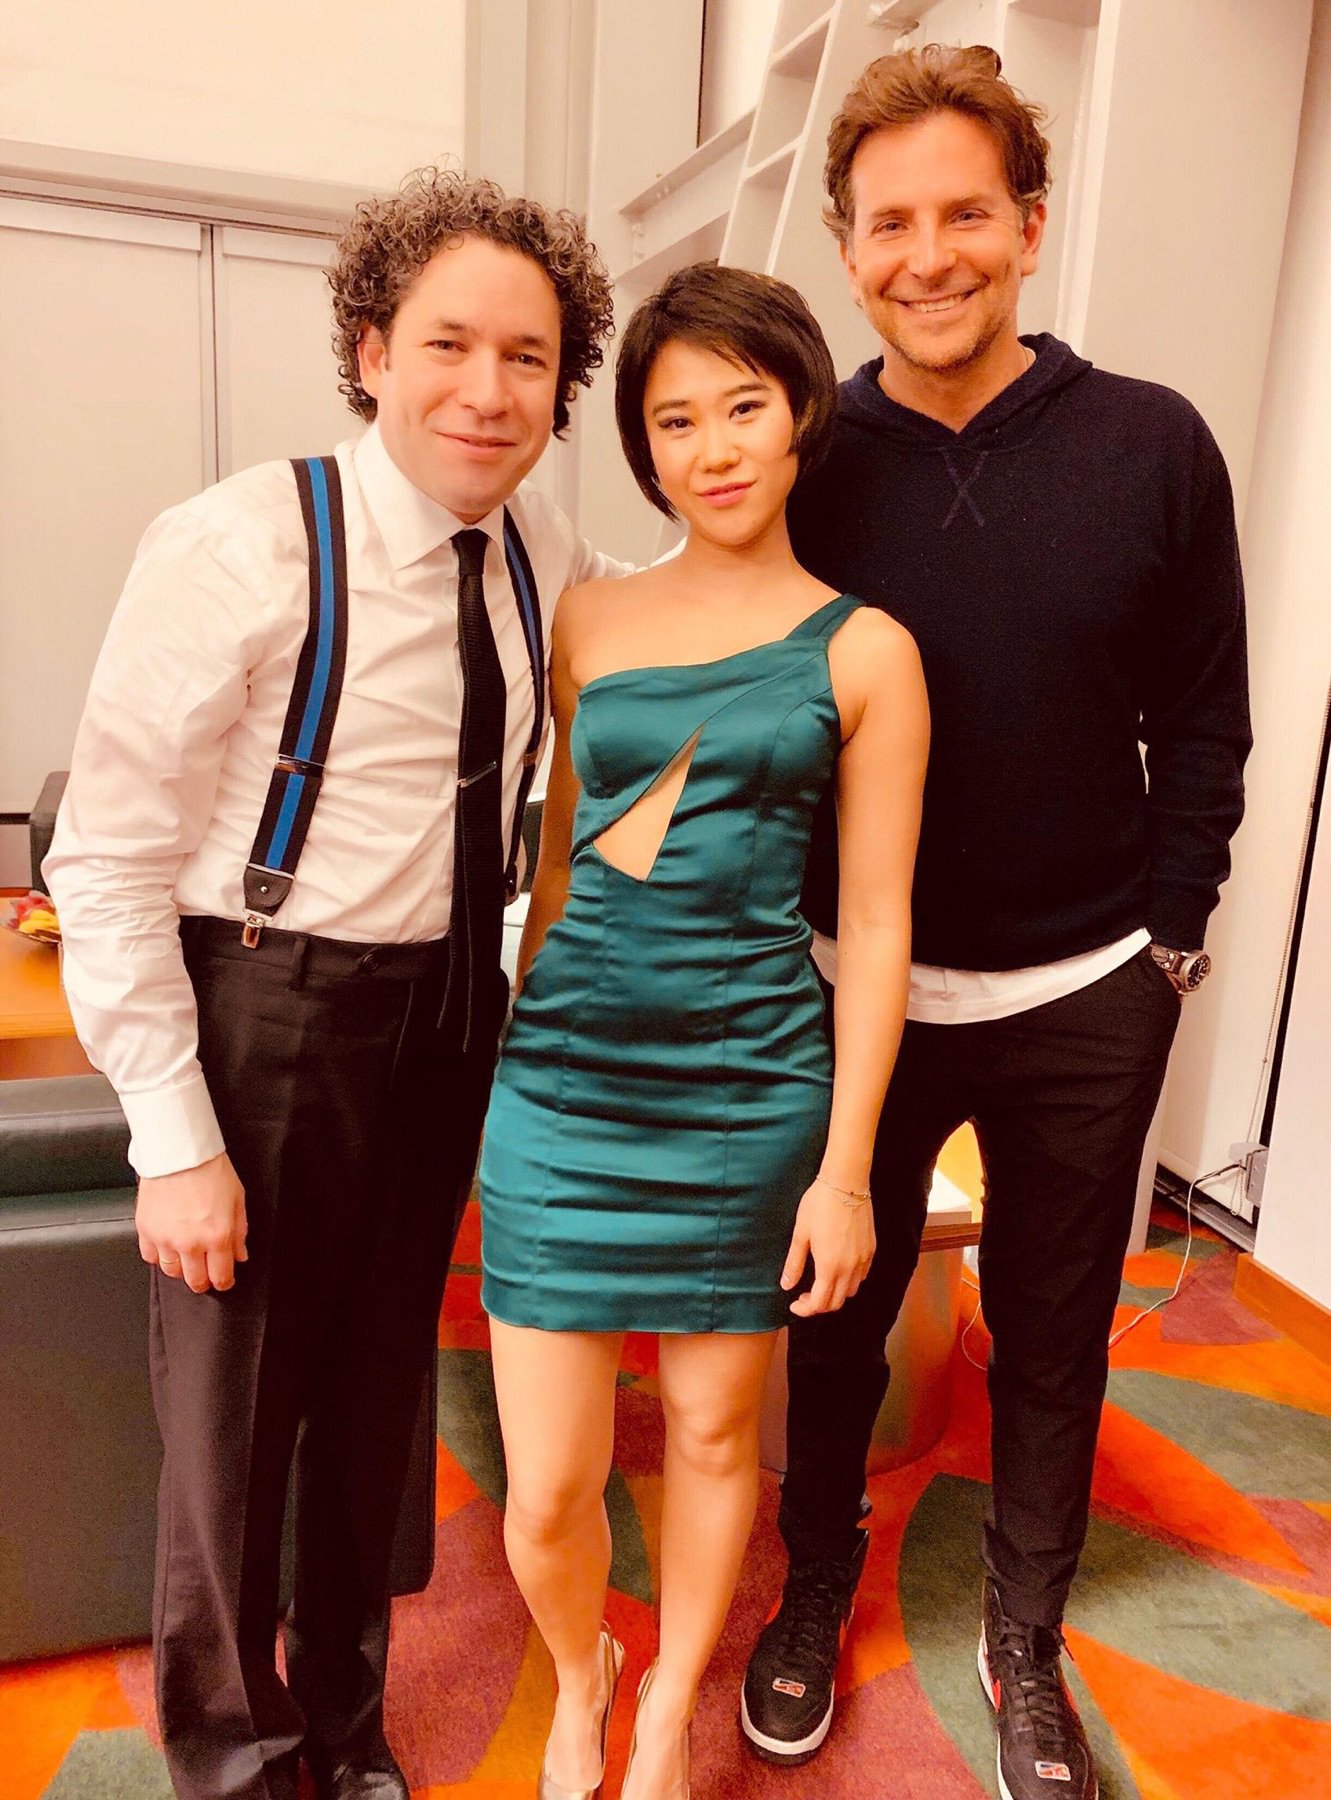 We had a GREAT surprise guest for our concert at Disney Hall! It was a huge pleasure to meet Bradley Cooper🔥. He is brilliant & so sweet! I’m excited about his upcoming movie about @LennyBernstein. I love that a #Hollywood star is inspired by our classical music world. @laphil